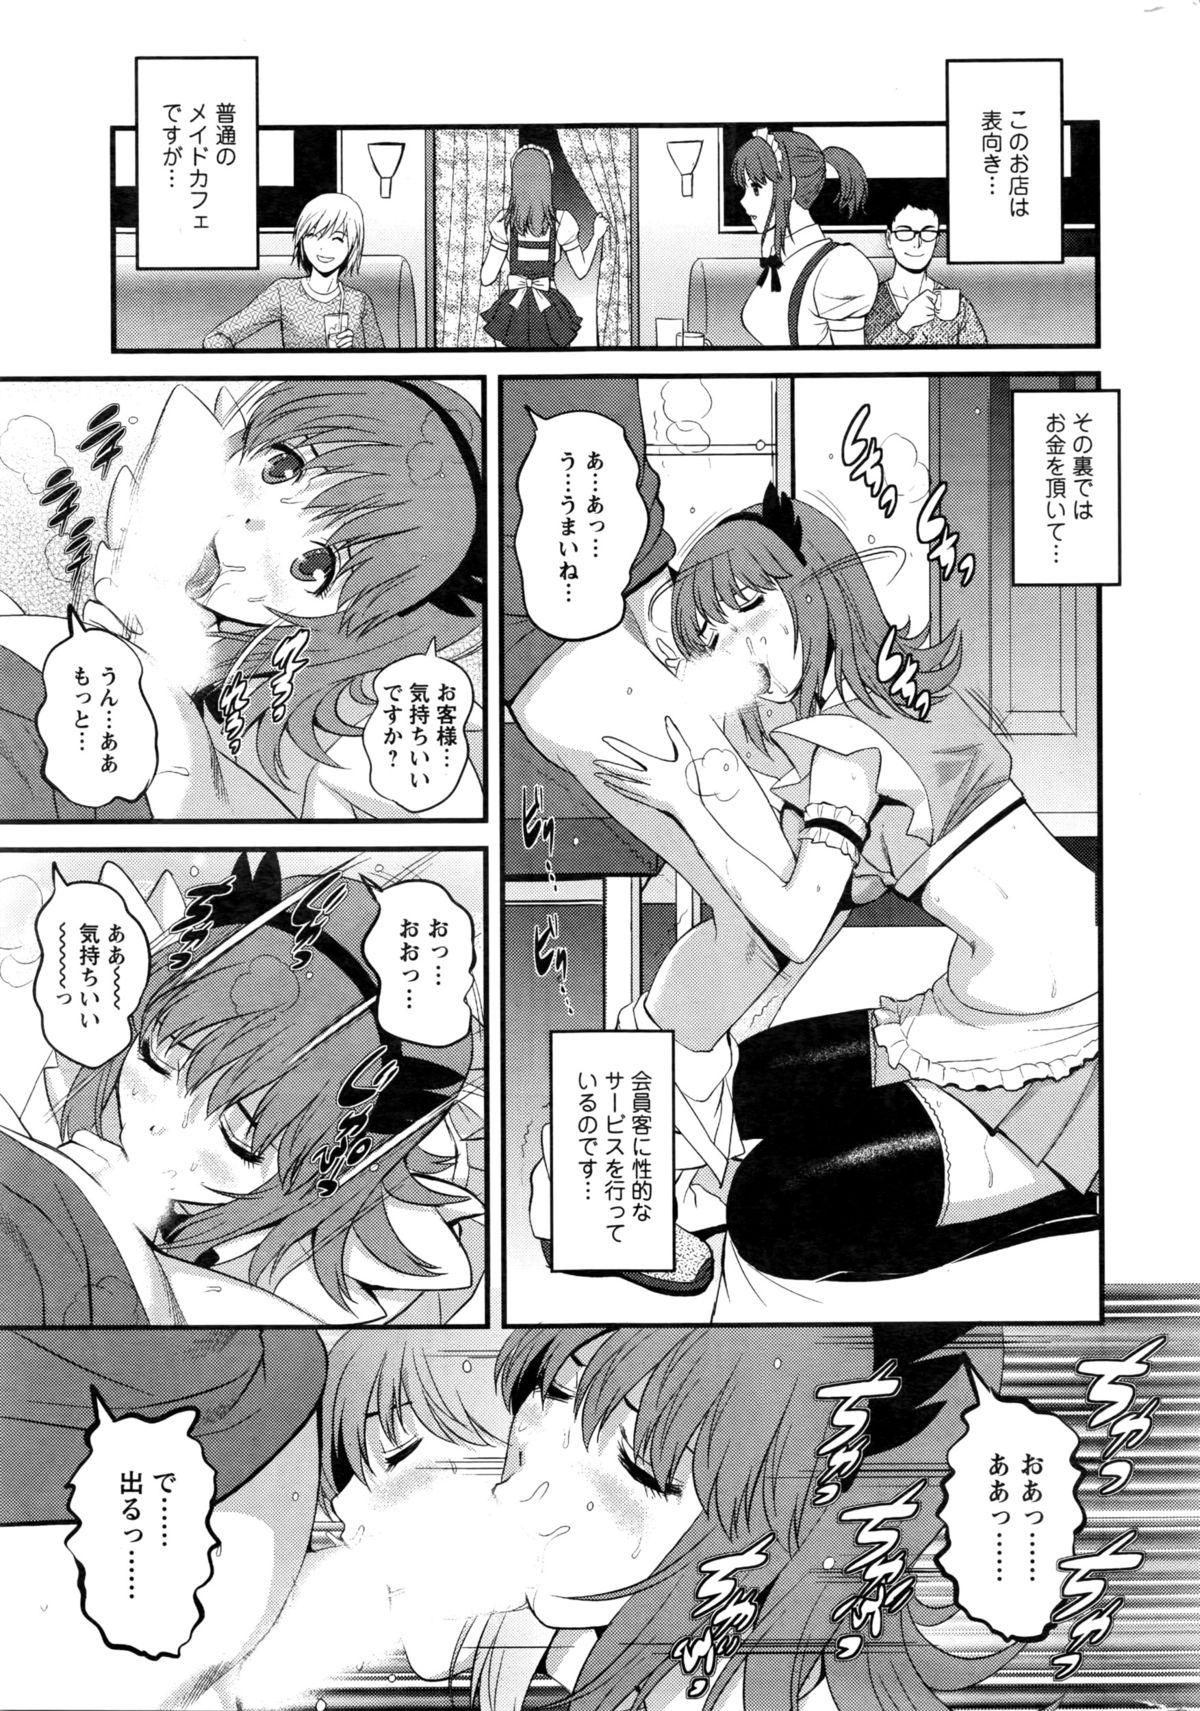 Gozada Part time Manaka-san 2nd Ch. 1 Instagram - Page 7